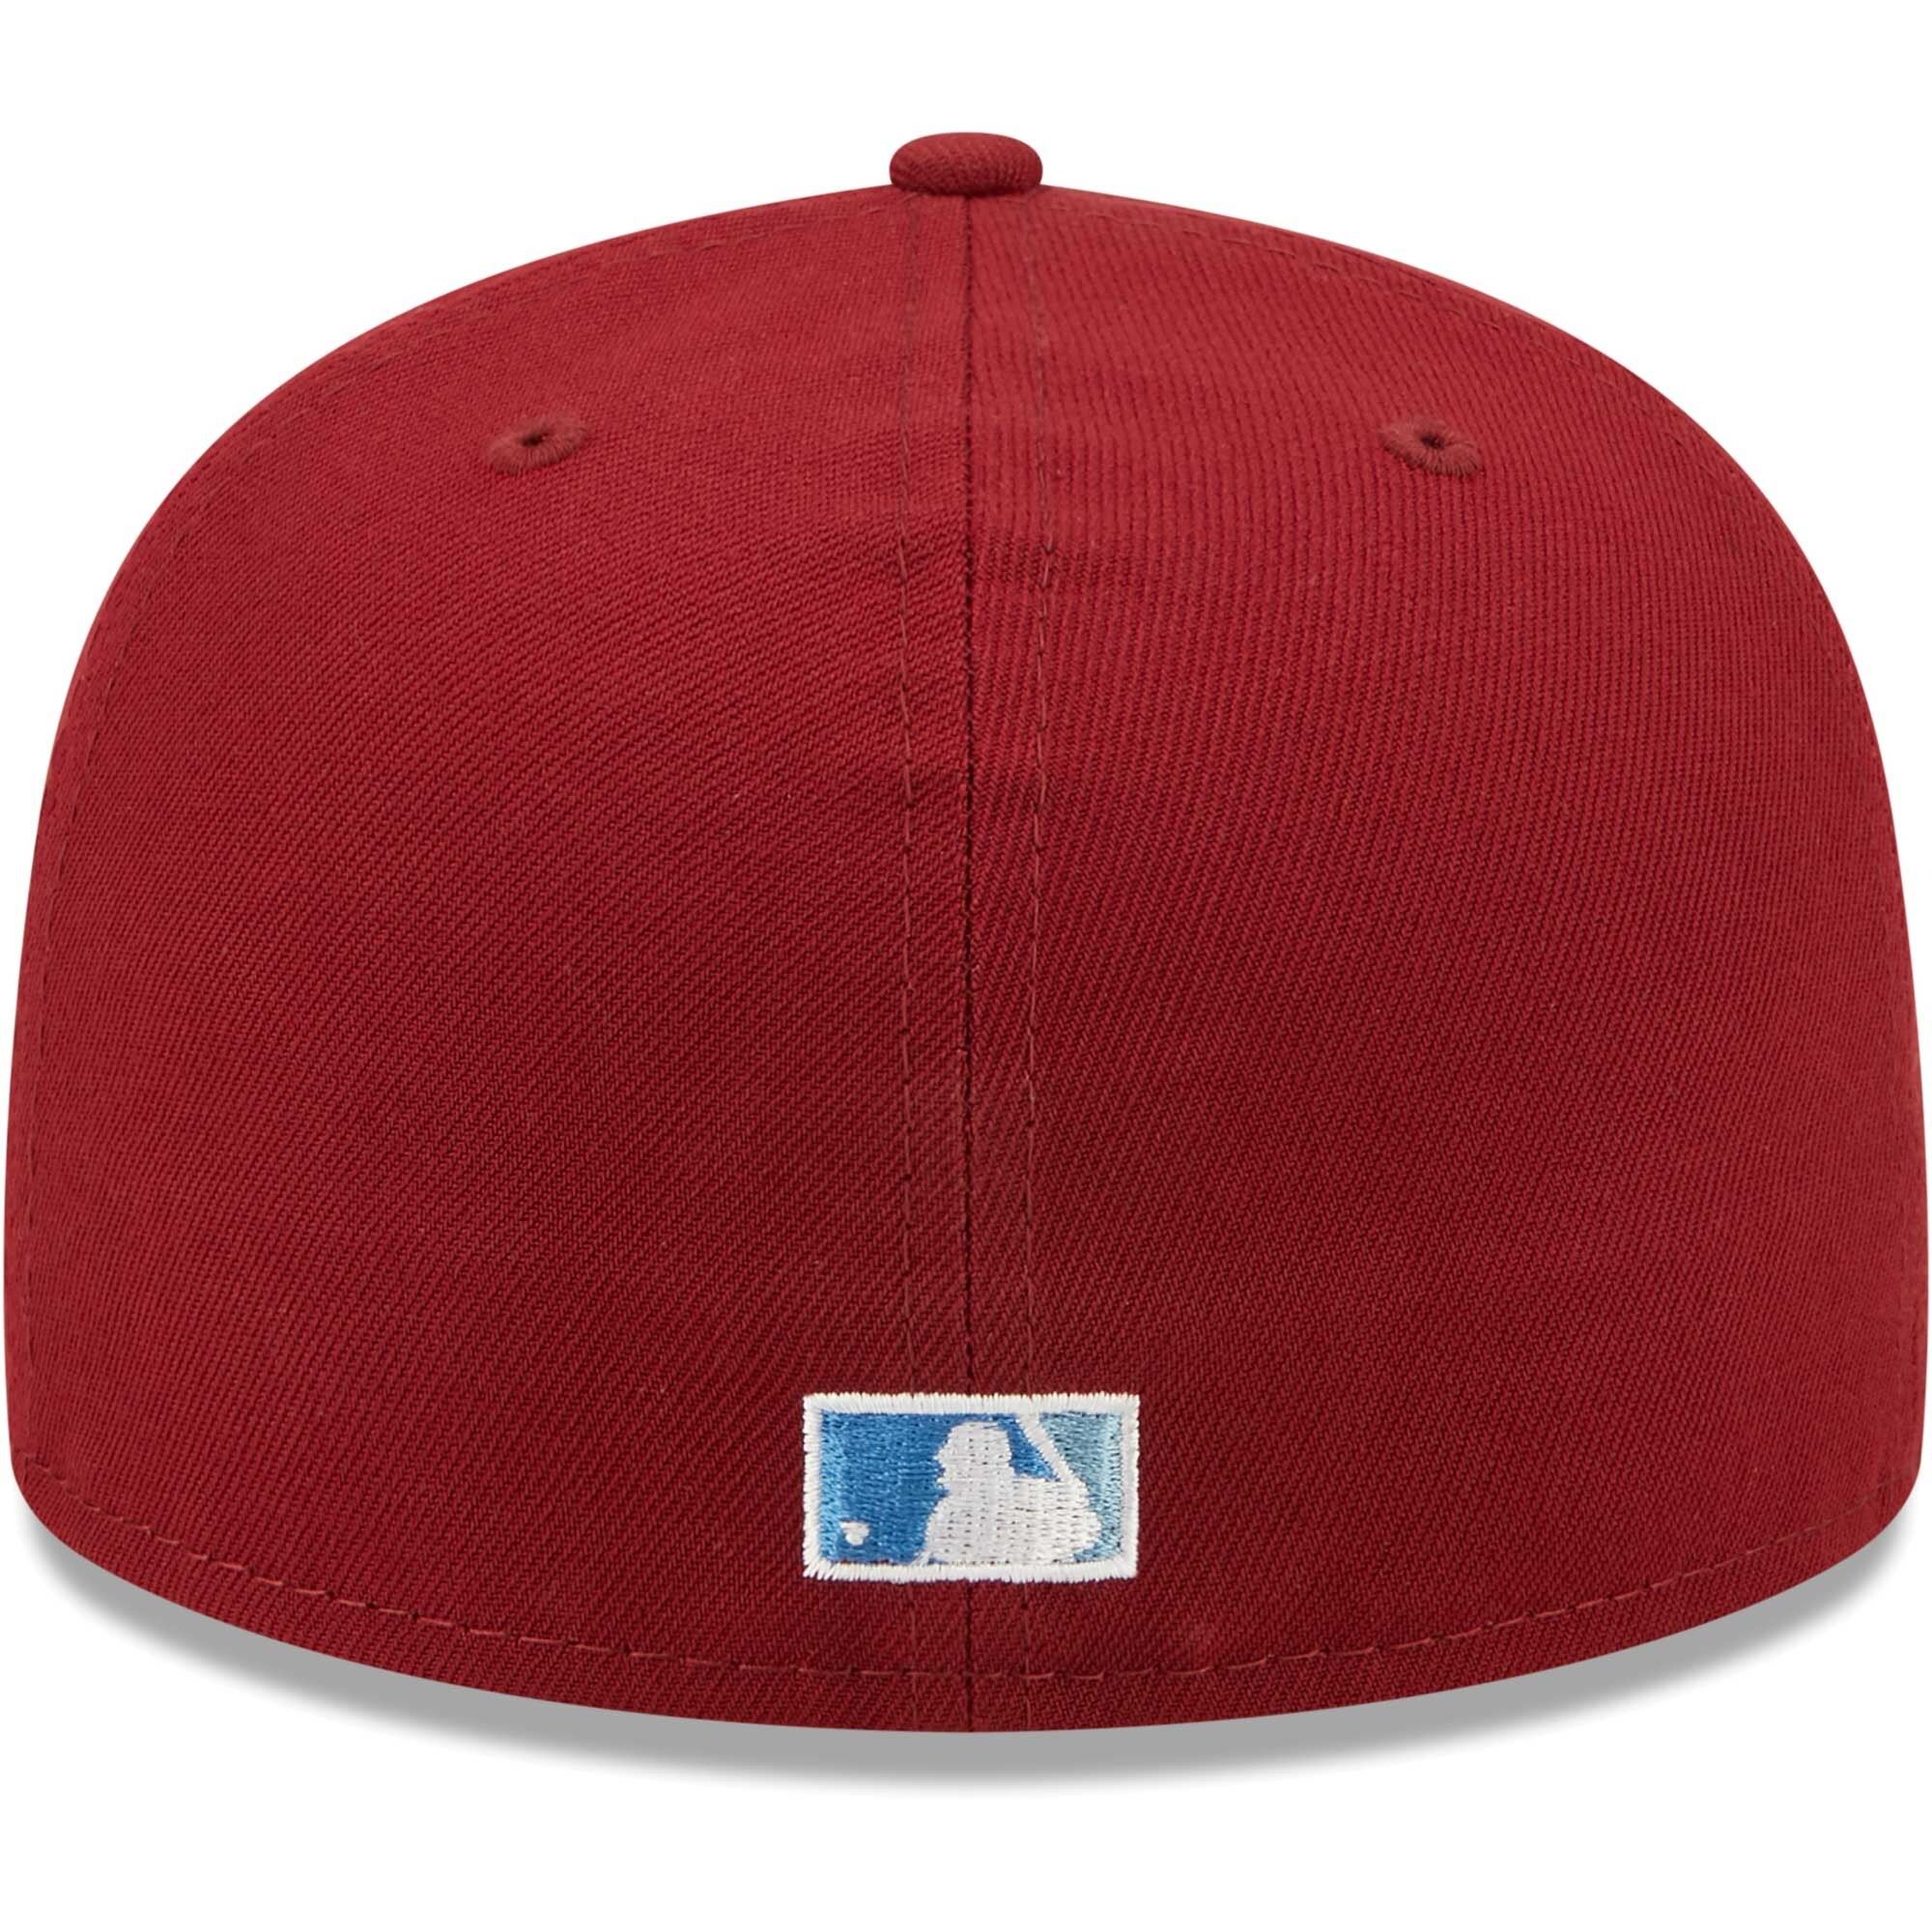 Oakland Athletics MLB Cooperstown 40th Anniversary Sidepatch Maroon Blue 59Fifty Basecap New Era